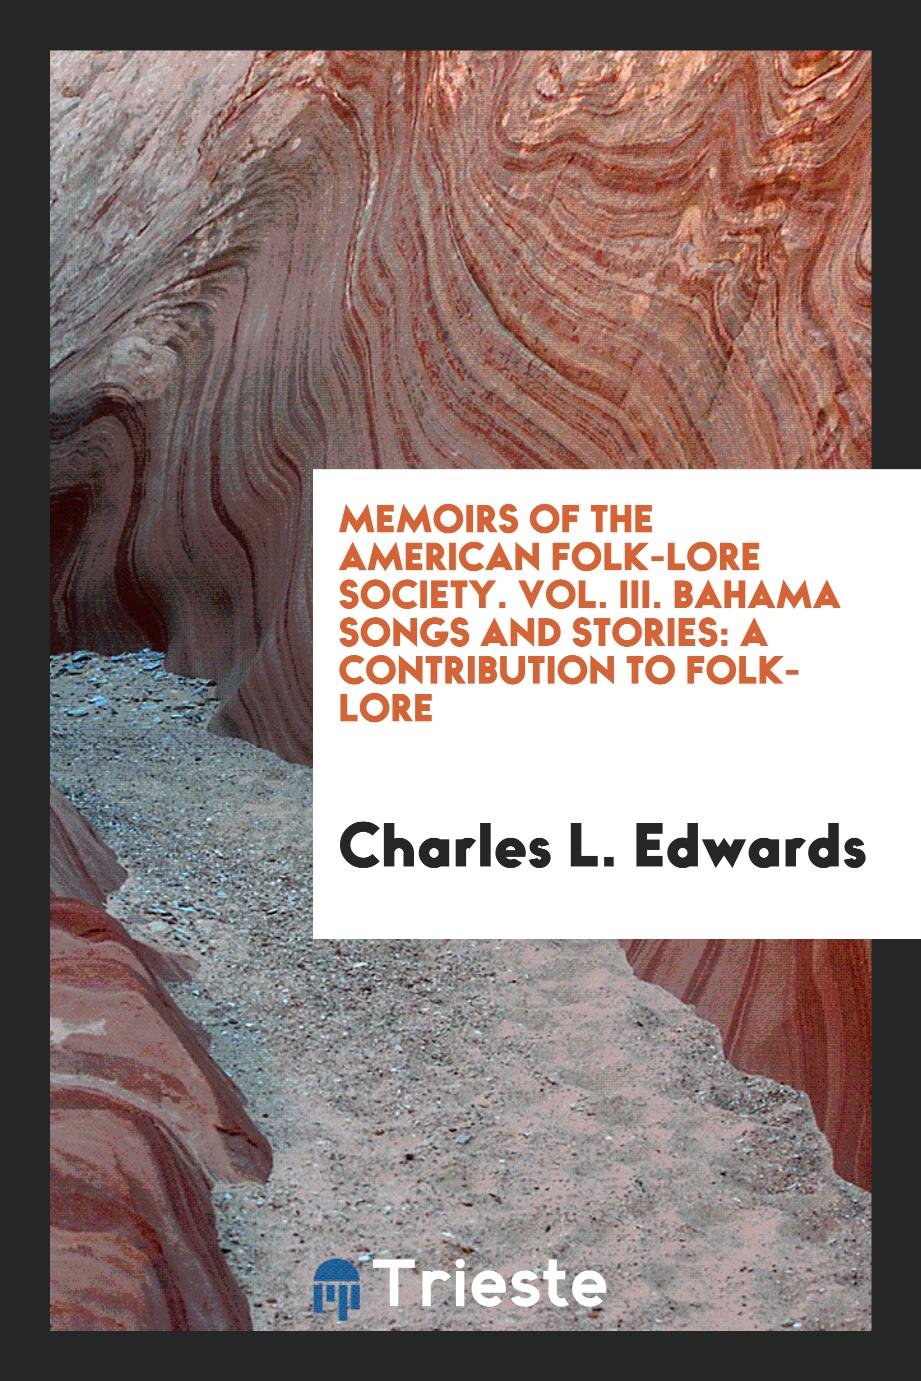 Memoirs of The American Folk-Lore Society. Vol. III. Bahama Songs and Stories: A Contribution to Folk-Lore